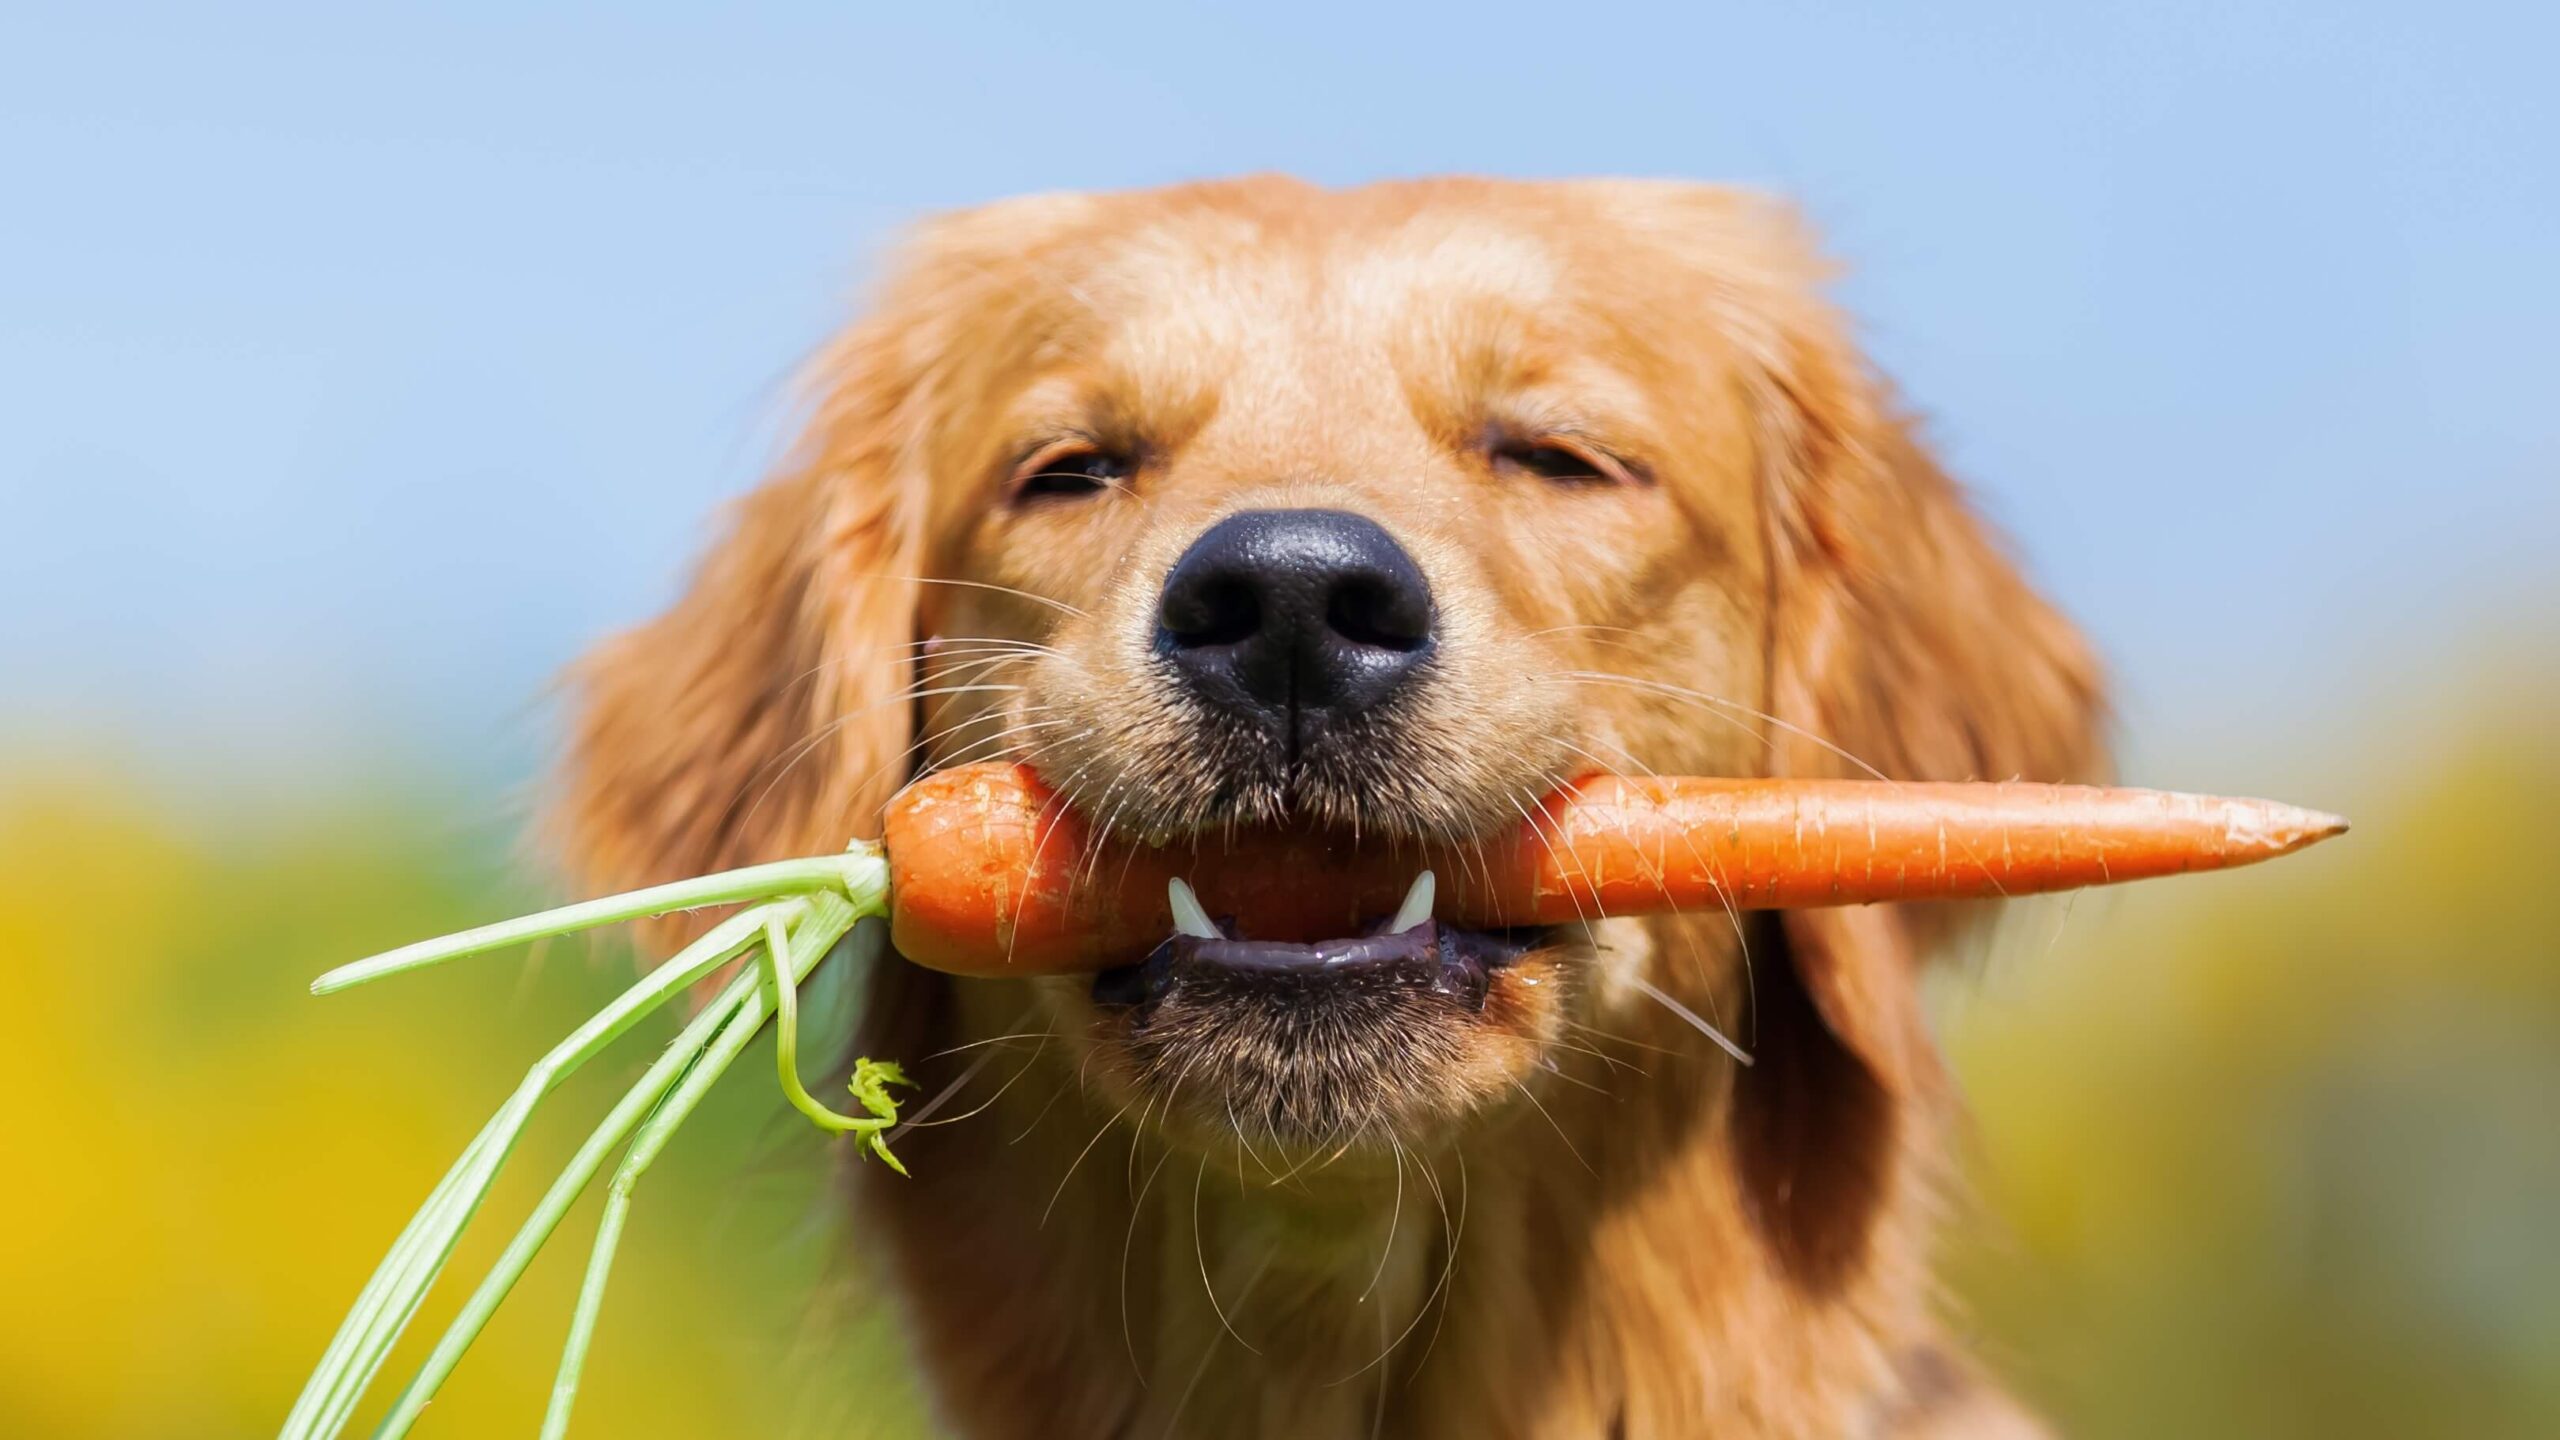 Veterinary Professor Calls Out ‘Ignorant’ Claims That Vegan Diets Are Unhealthy For Pets